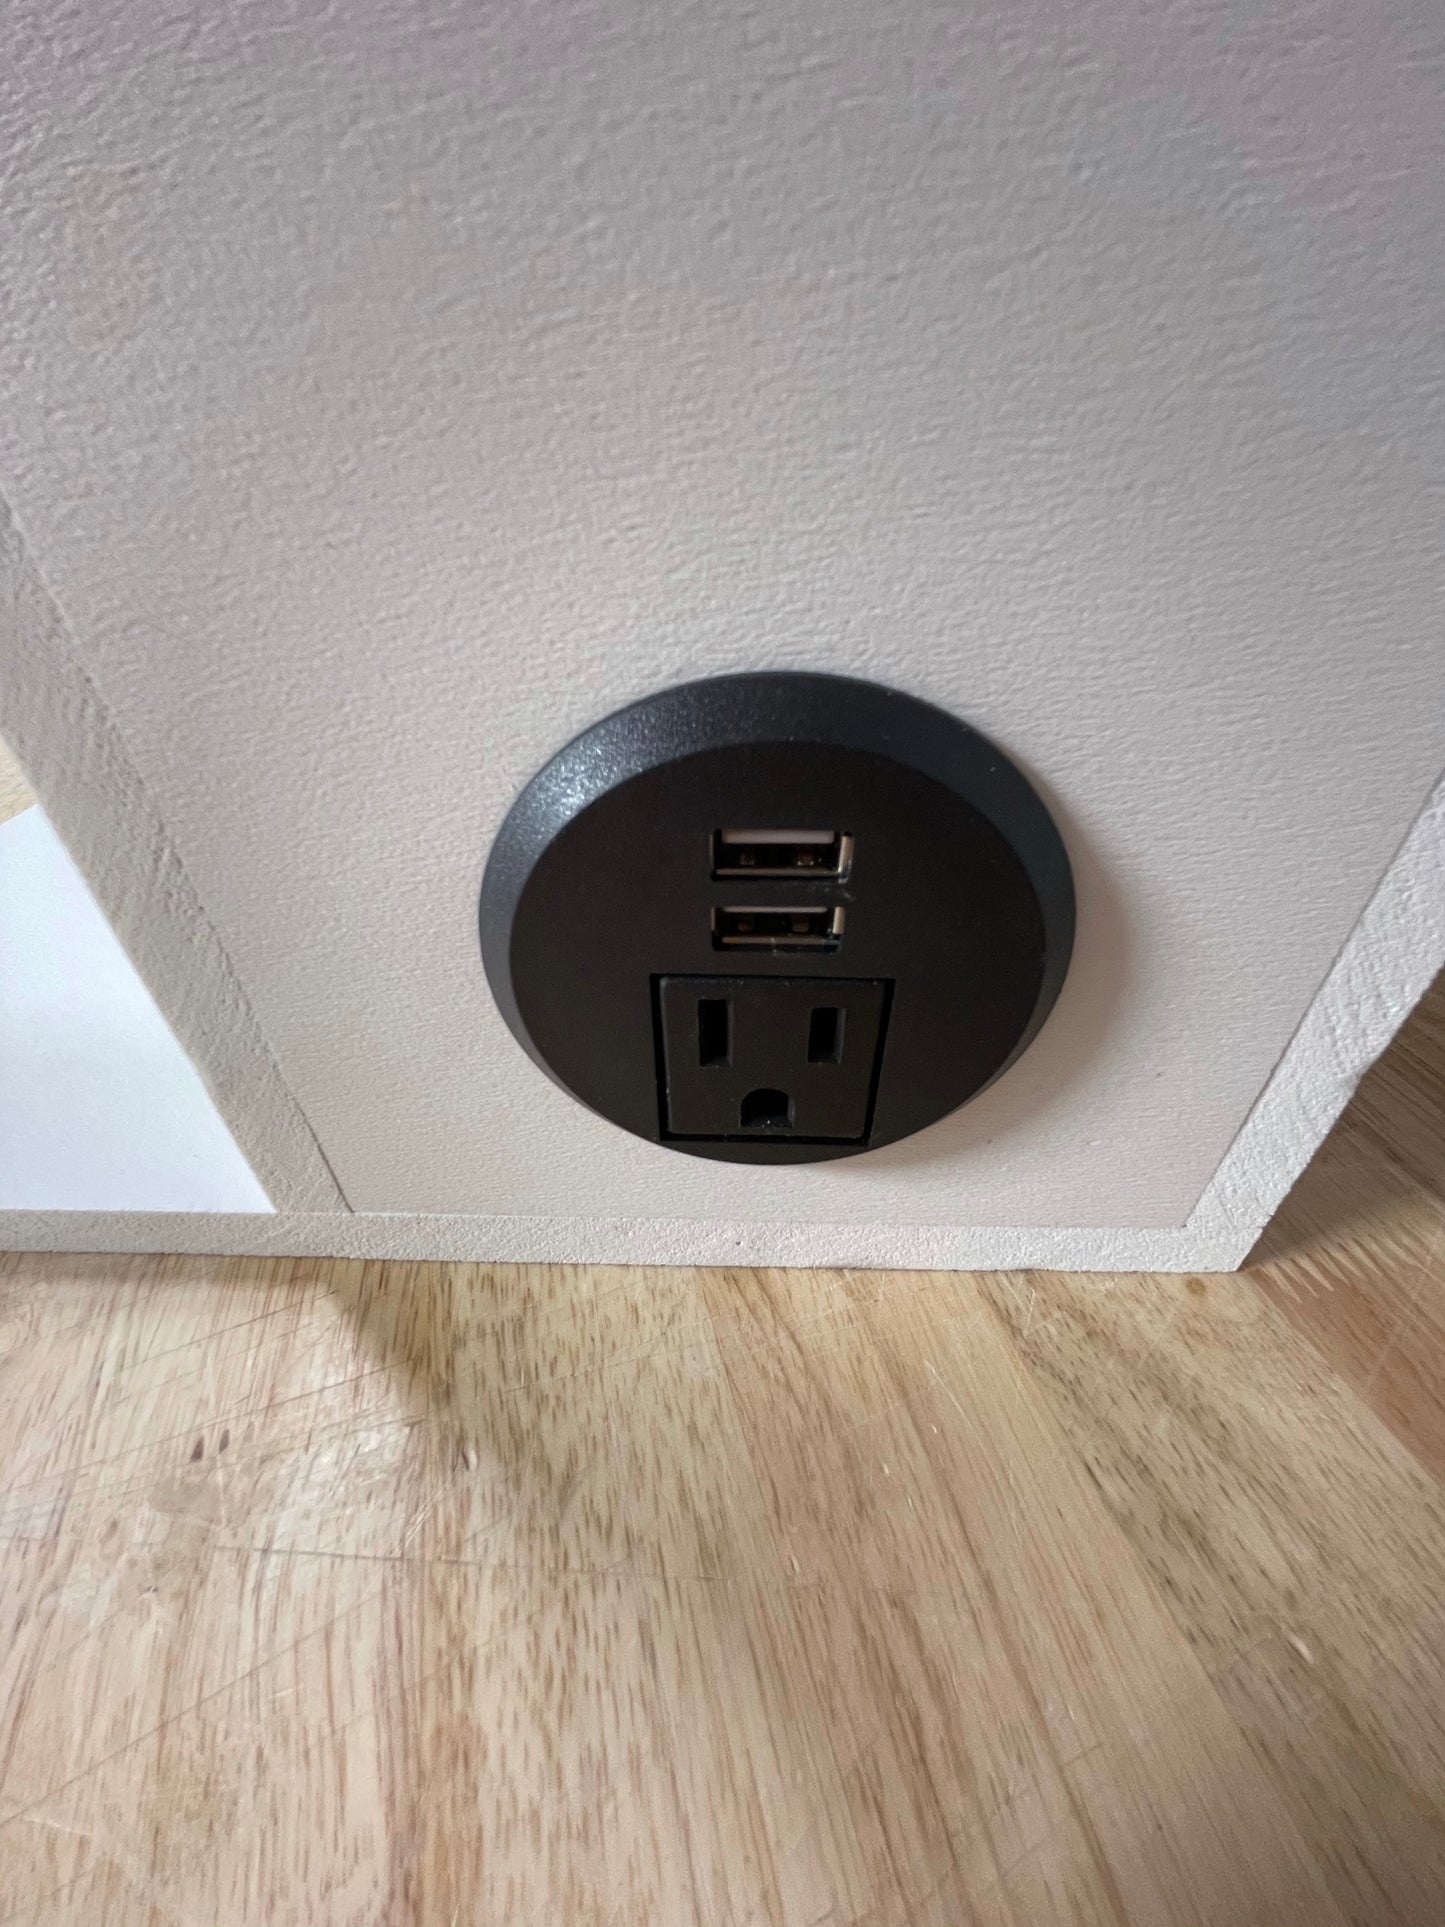 USB & Power Outlet Add On